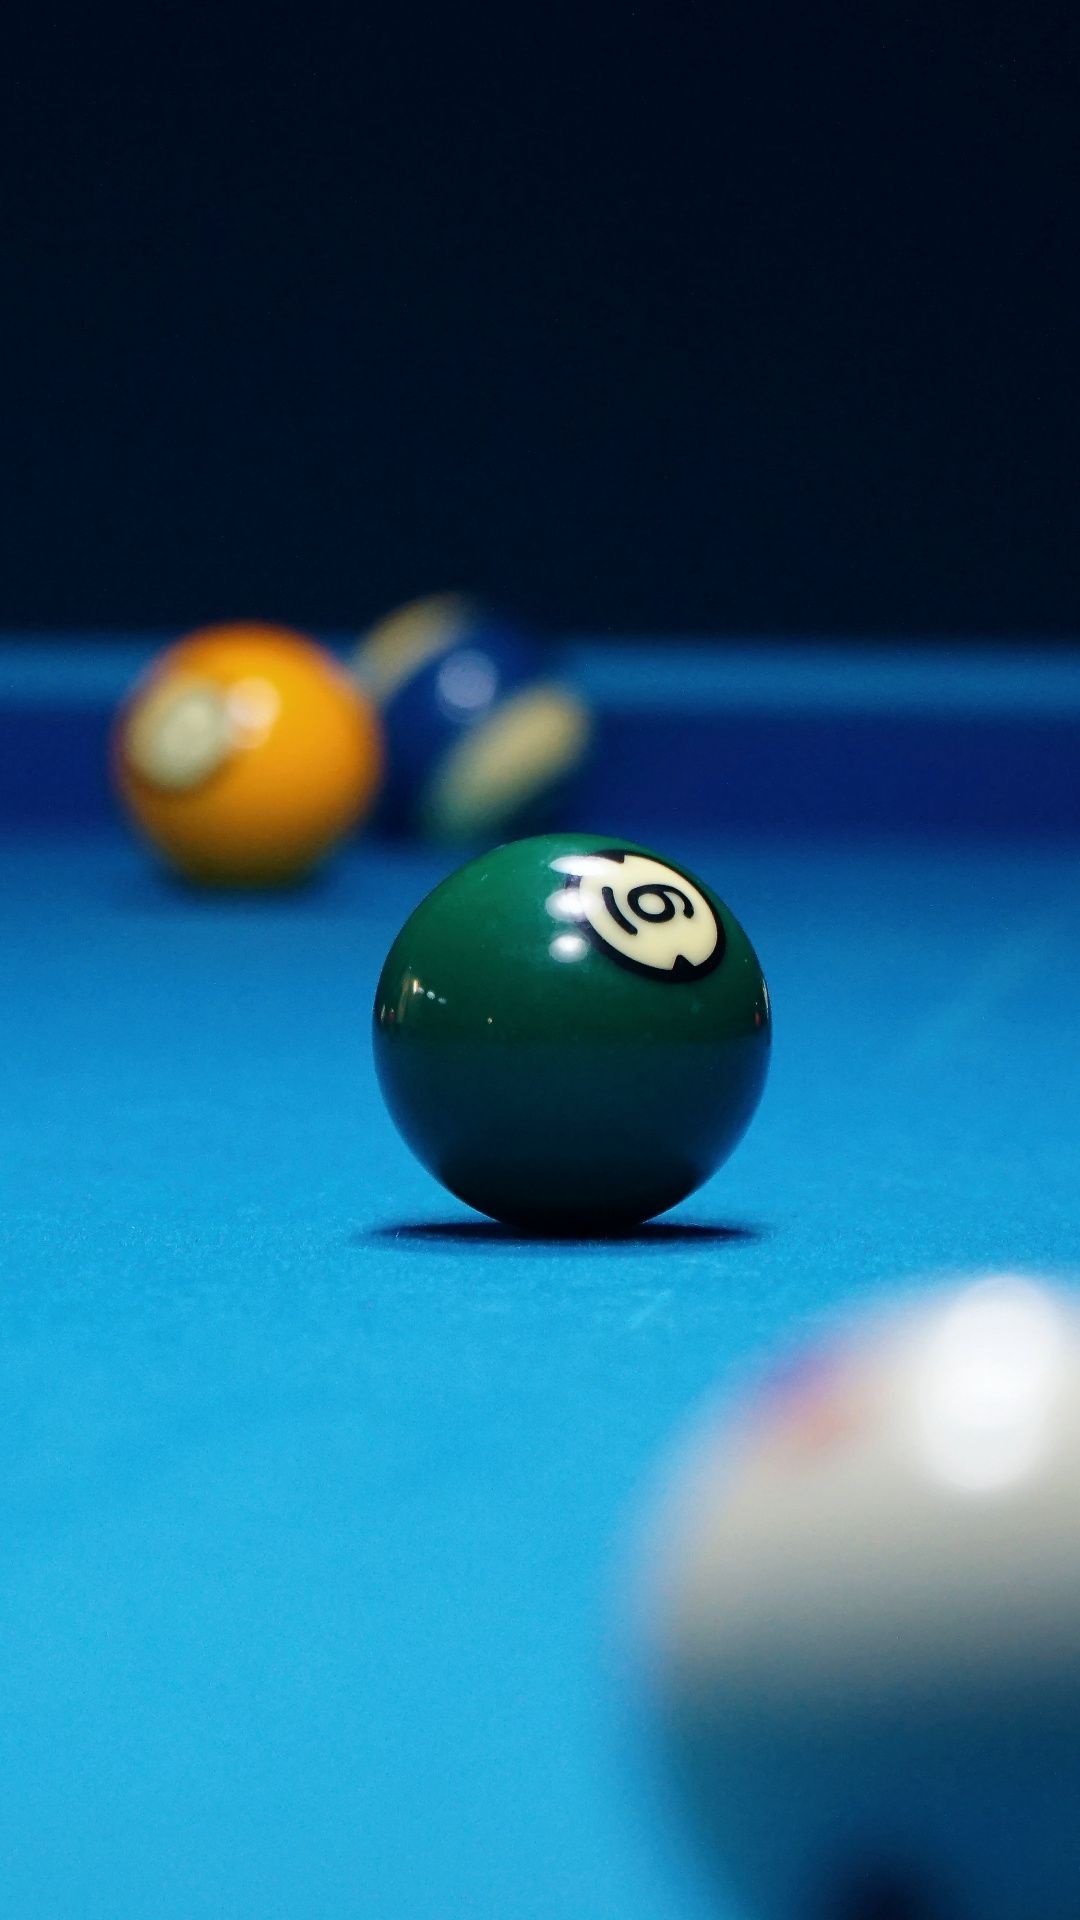 Billiards: Object balls, Small but hard and numbered balls used in carom, pool, and snooker. 1080x1920 Full HD Wallpaper.